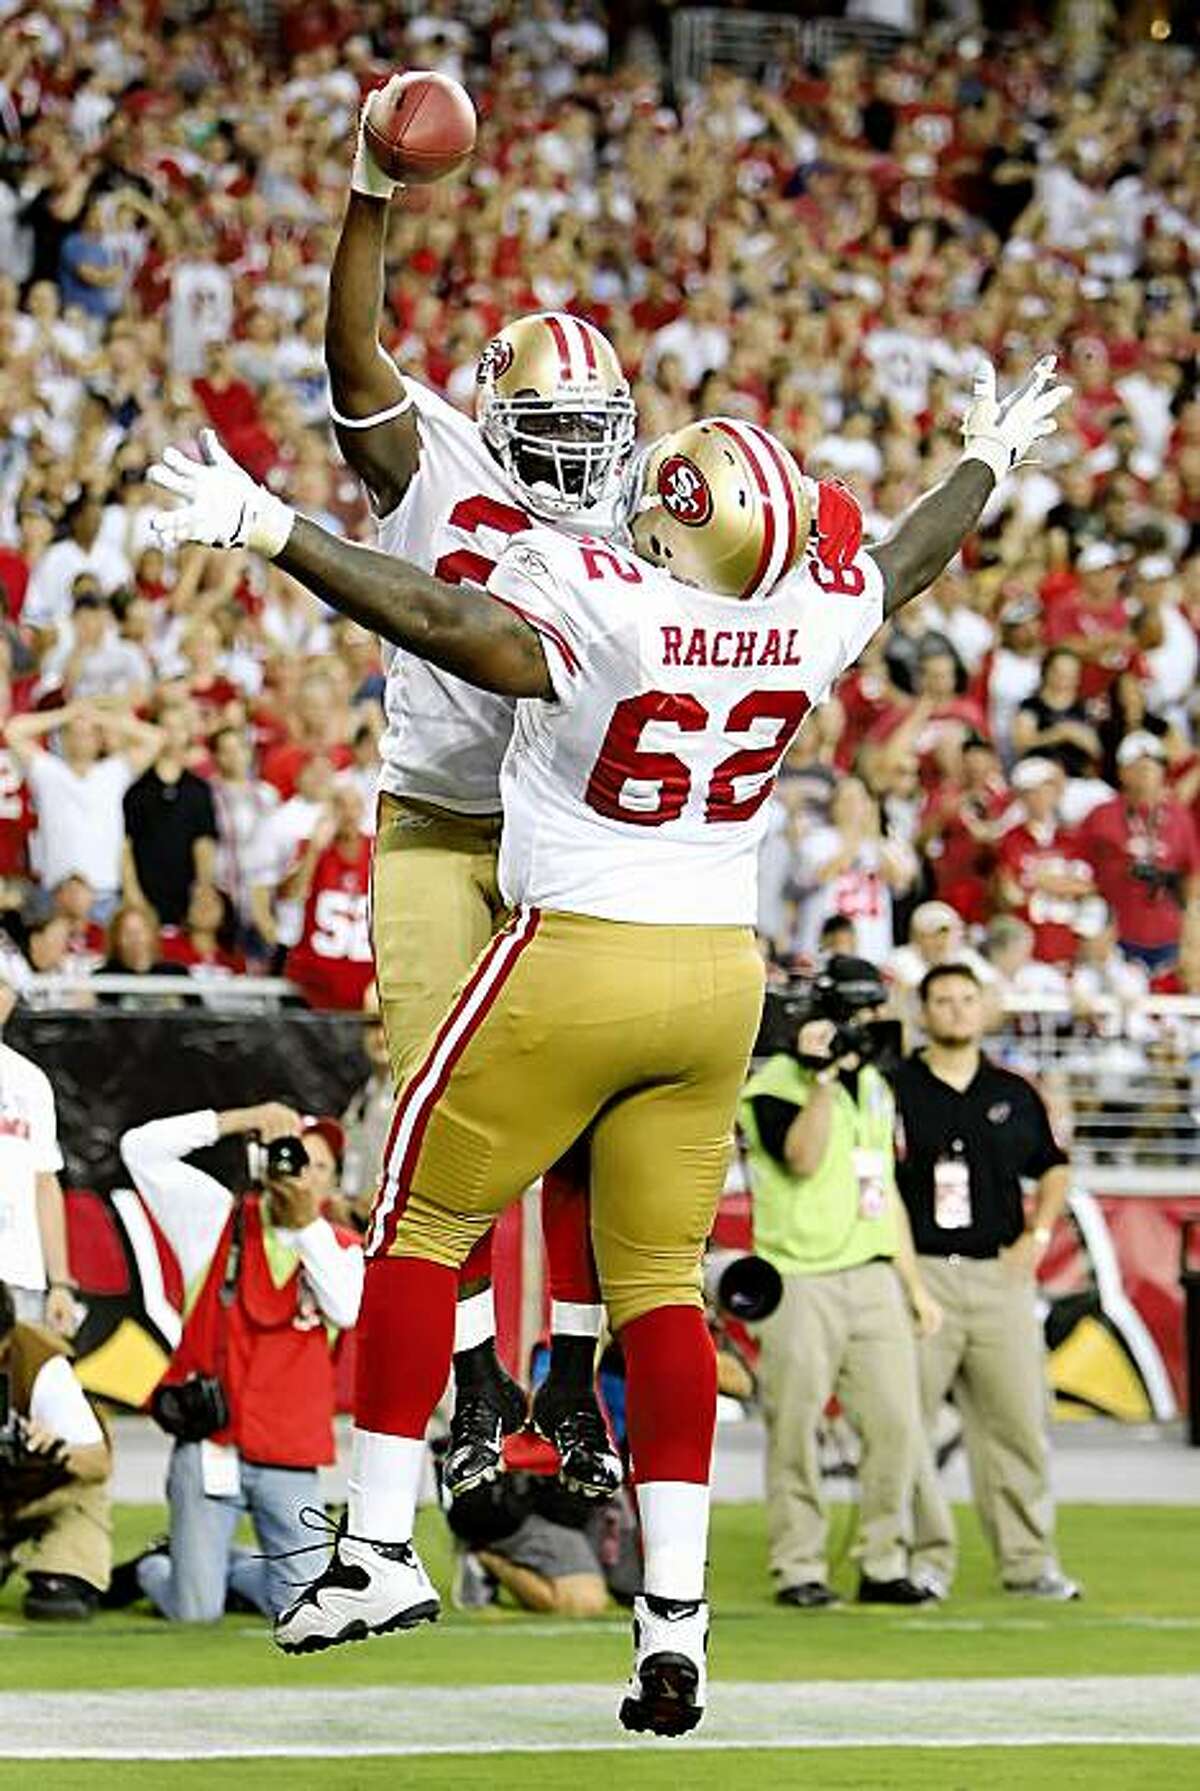 GLENDALE, AZ - SEPTEMBER 13: Running back Frank Gore #21 of the San Francisco 49ers celebrates with teammate Chilo Rachal #62 after Gore scored a 3 yard touchdown reception against the Arizona Cardinals during the NFL game at the Universtity of Phoenix Stadium on September 13, 2009 in Glendale, Arizona. The 49ers defeated the Cardinals 20-16. (Photo by Christian Petersen/Getty Images)